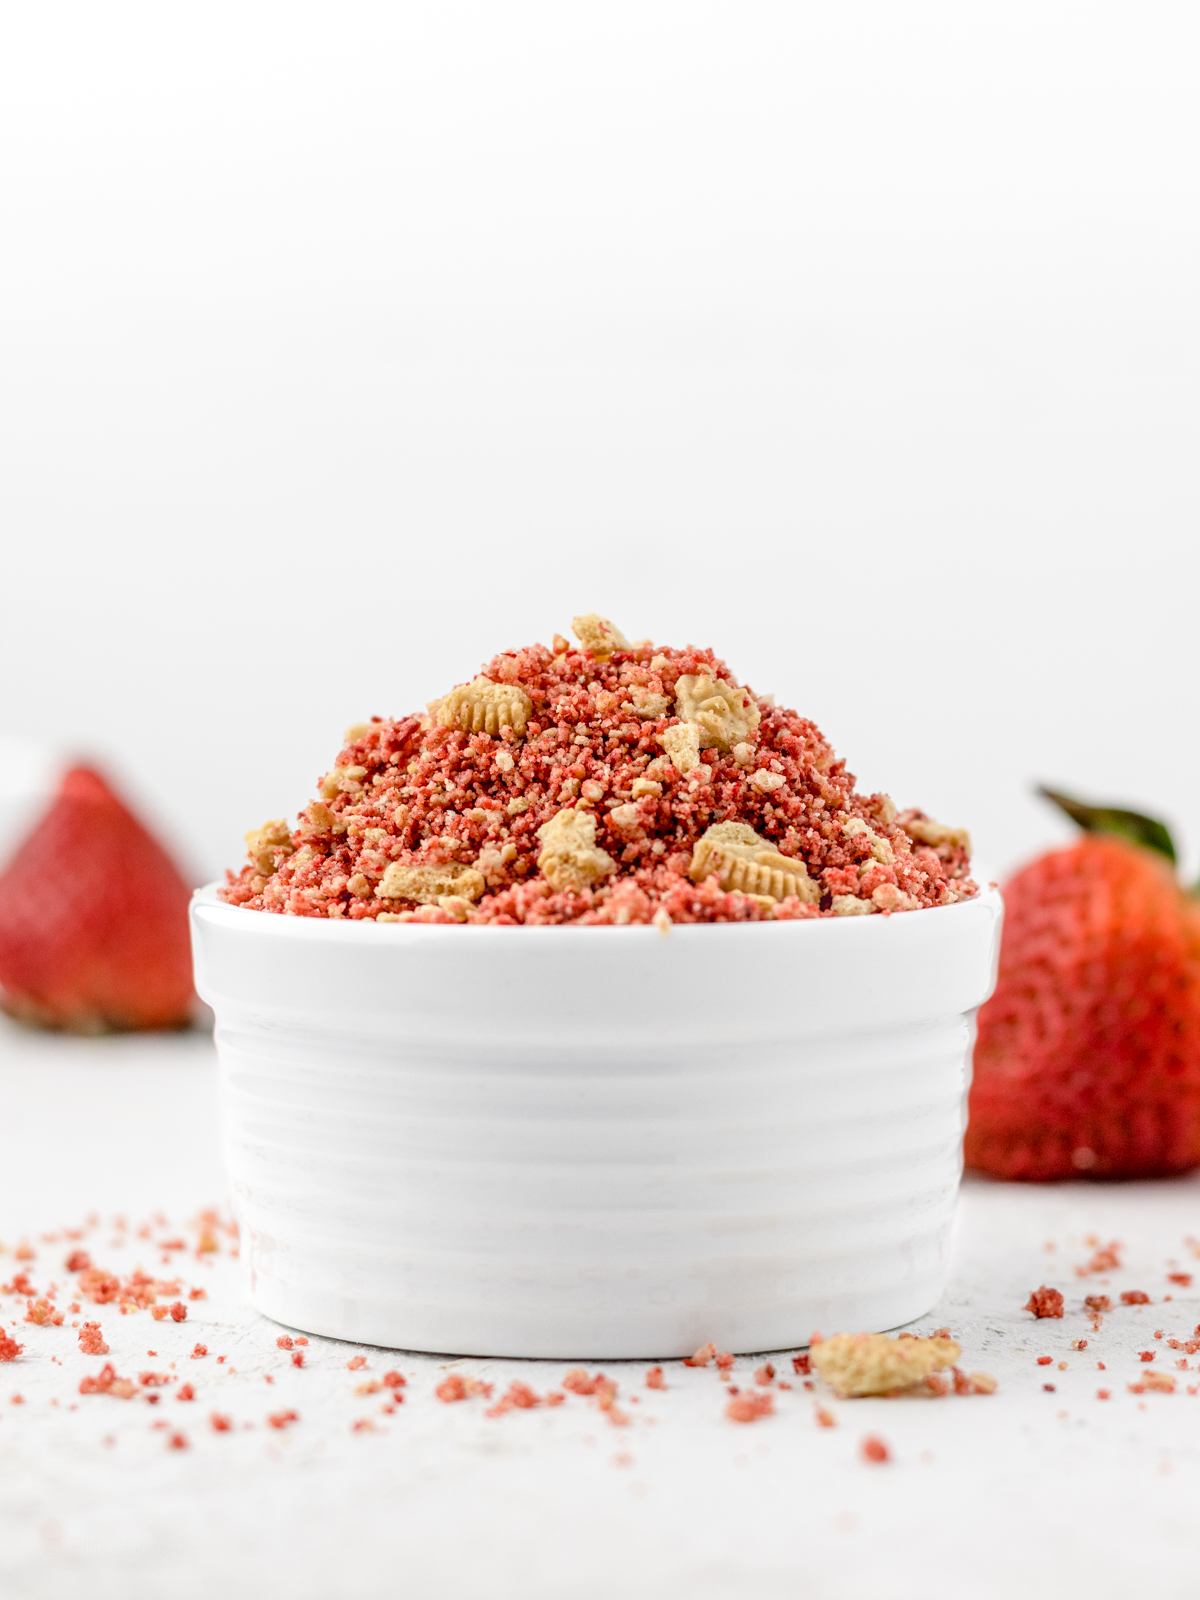 Strawberry Crunch Topping in a white bowl surrounded by cookie crumbs and strawberries.